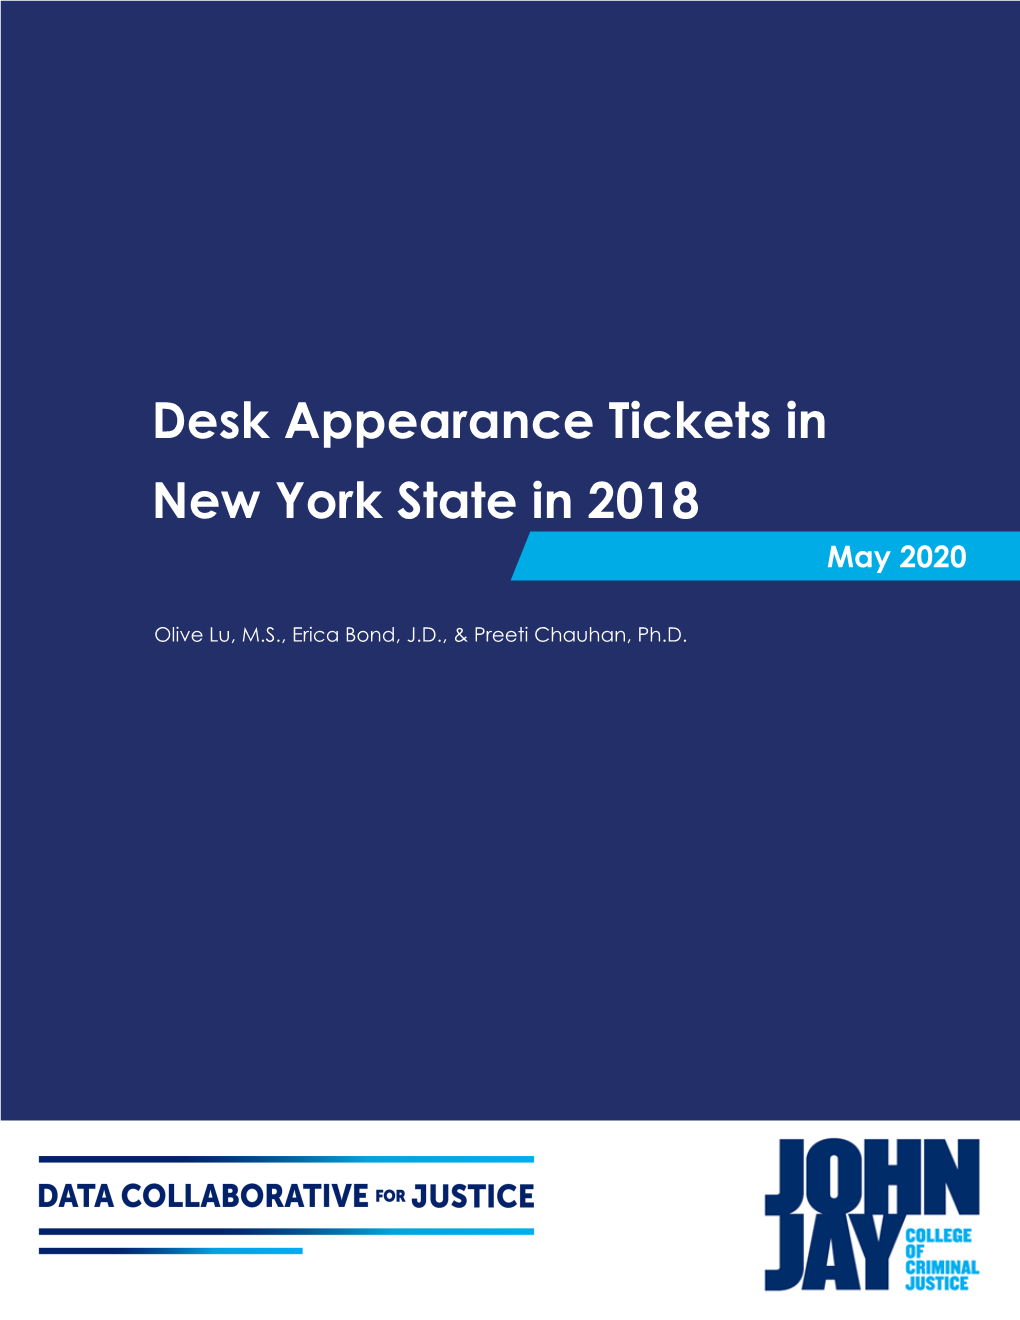 Desk Appearance Tickets in New York State in 2018 May 2020